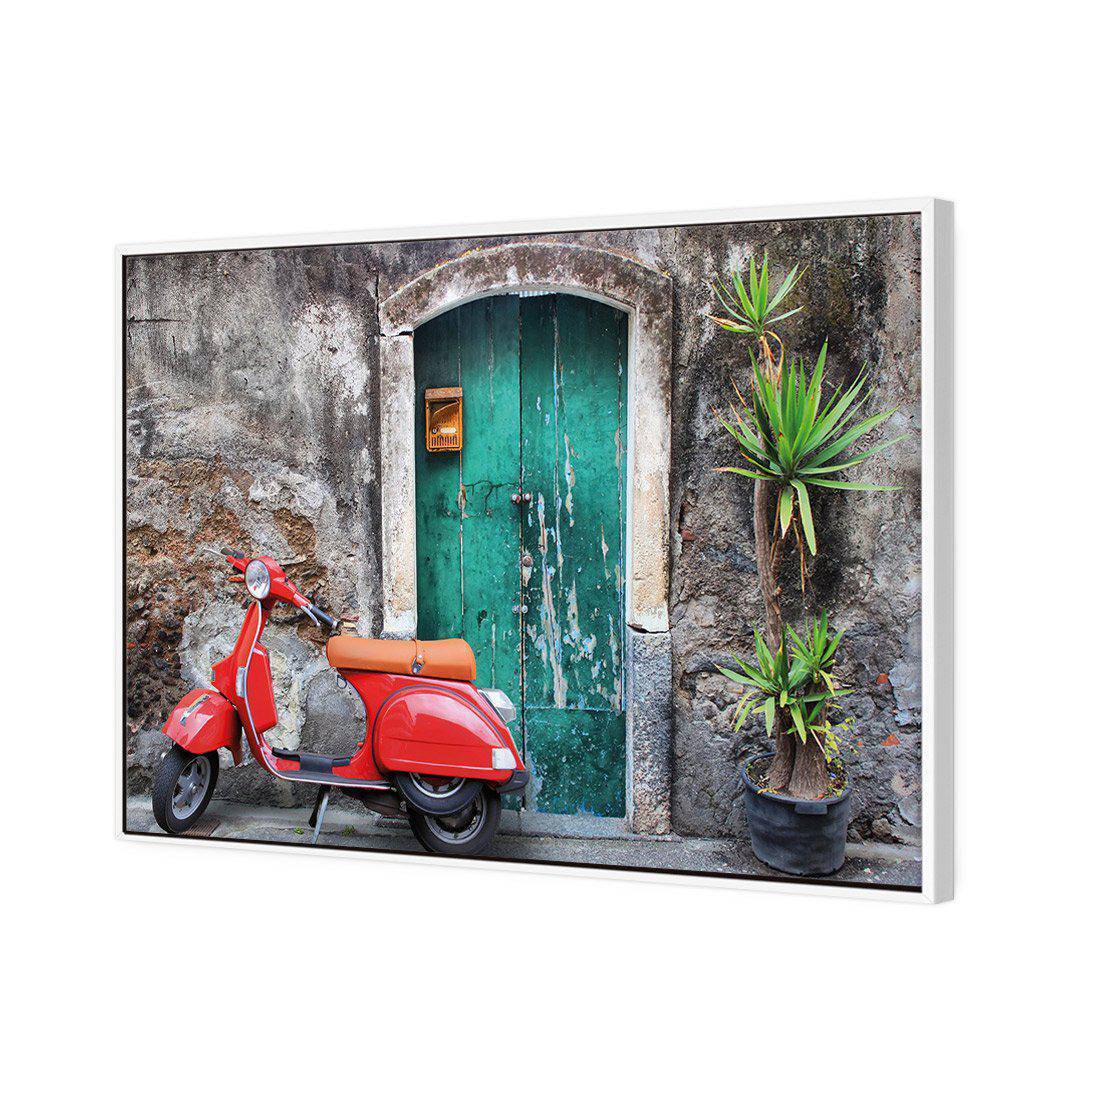 Vintage Door And Scooter Canvas Art-Canvas-Wall Art Designs-45x30cm-Canvas - White Frame-Wall Art Designs